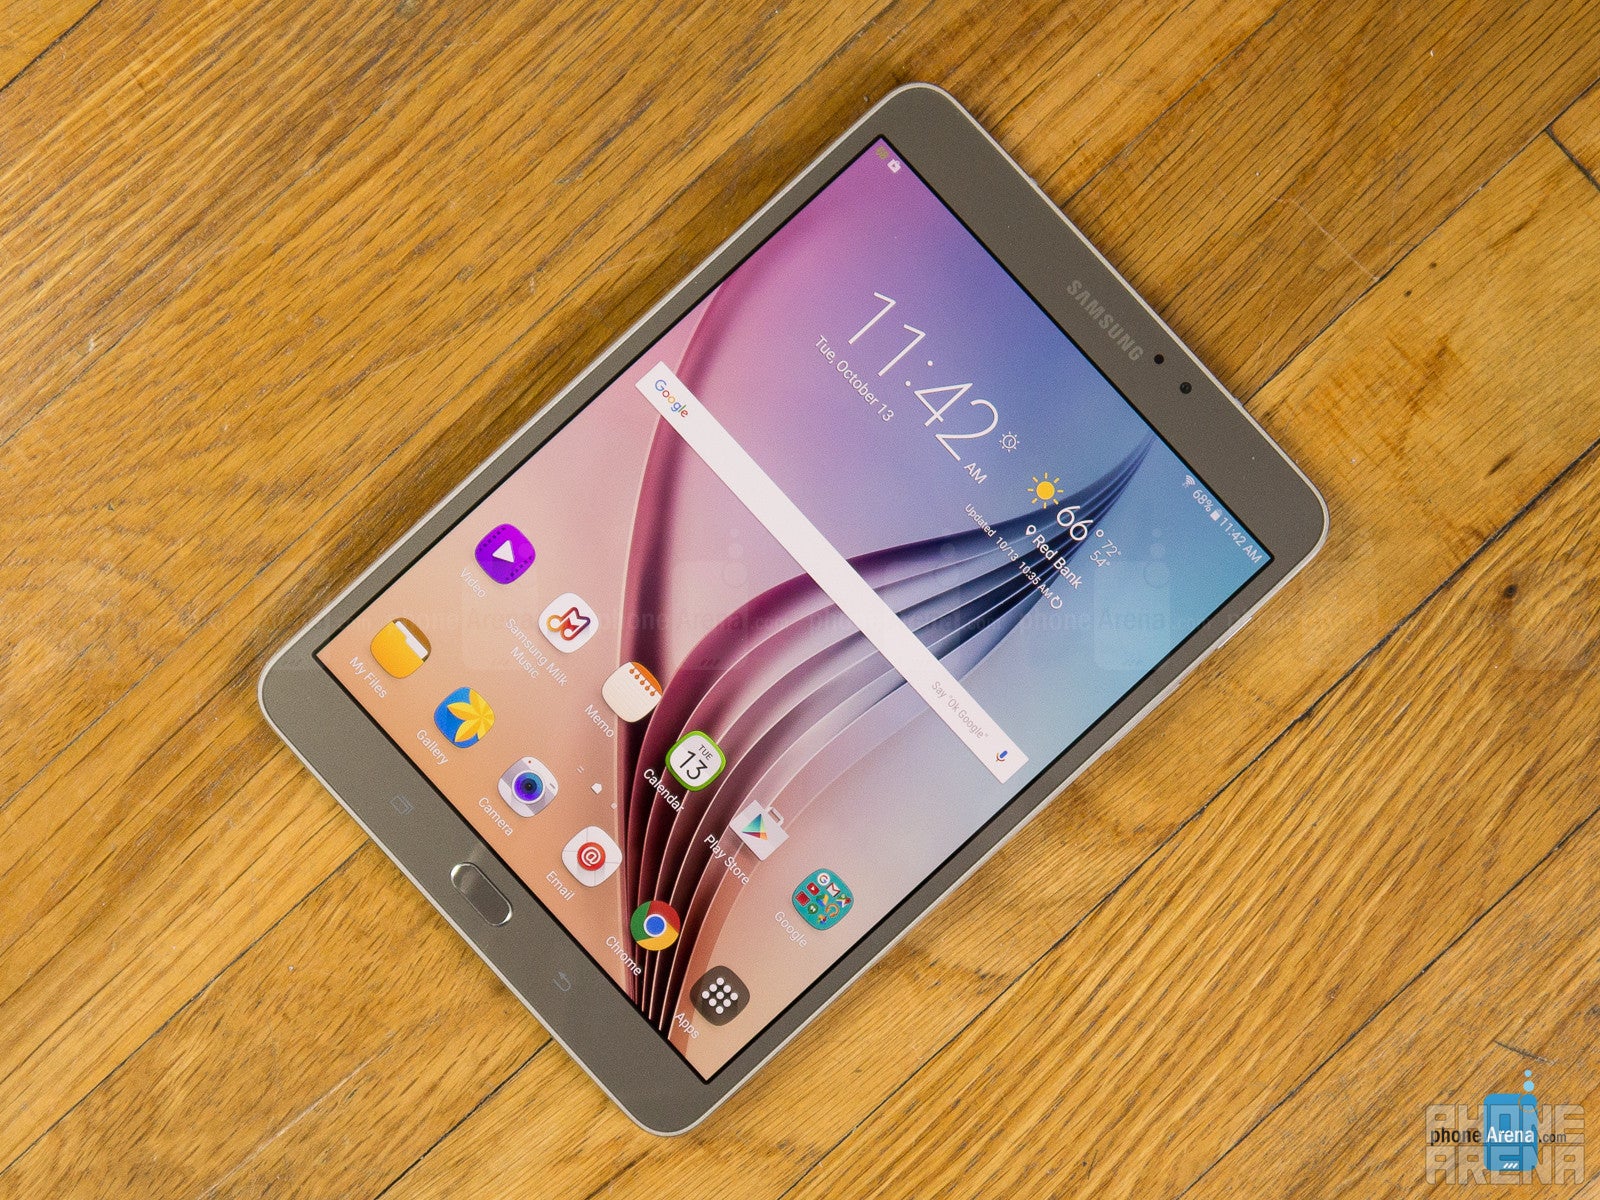 Samsung Galaxy Tab S2 8-inch - Samsung Galaxy Tab S3: Design, specs, price, release date, and all you need to know